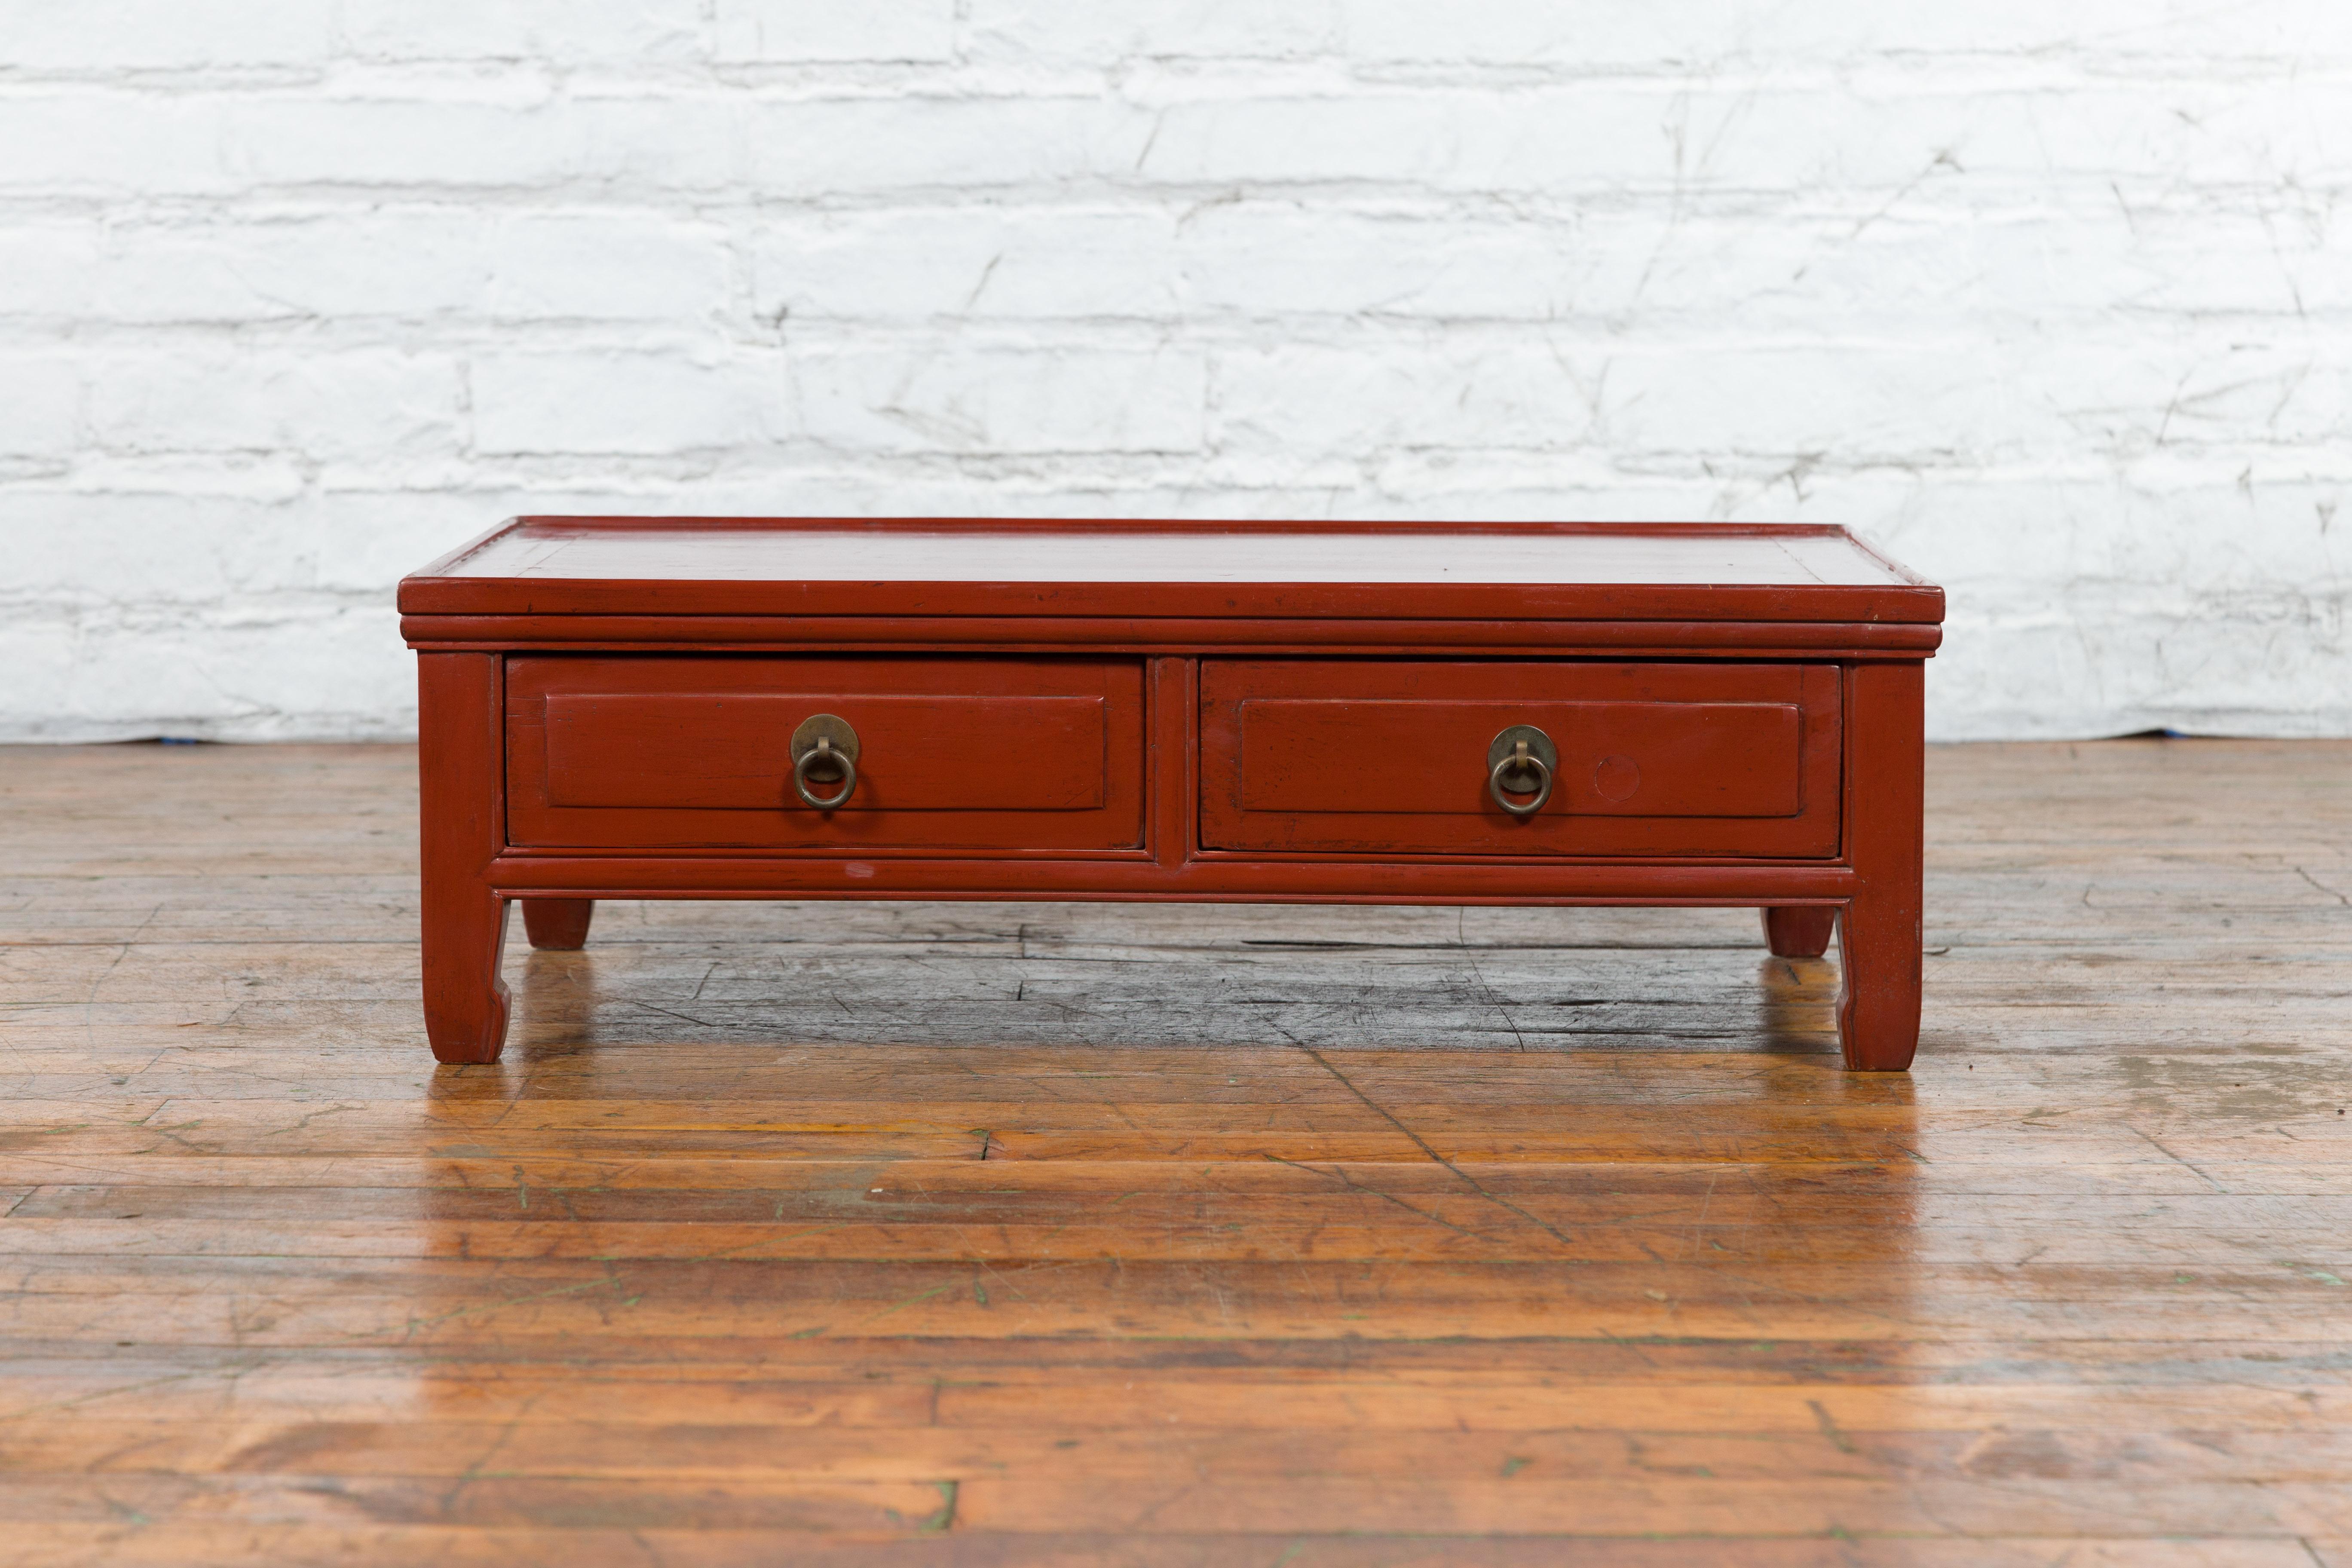 Qing Dynasty Red Lacquer Low Kang Coffee Table with Drawers and Horse Hoof Feet For Sale 6